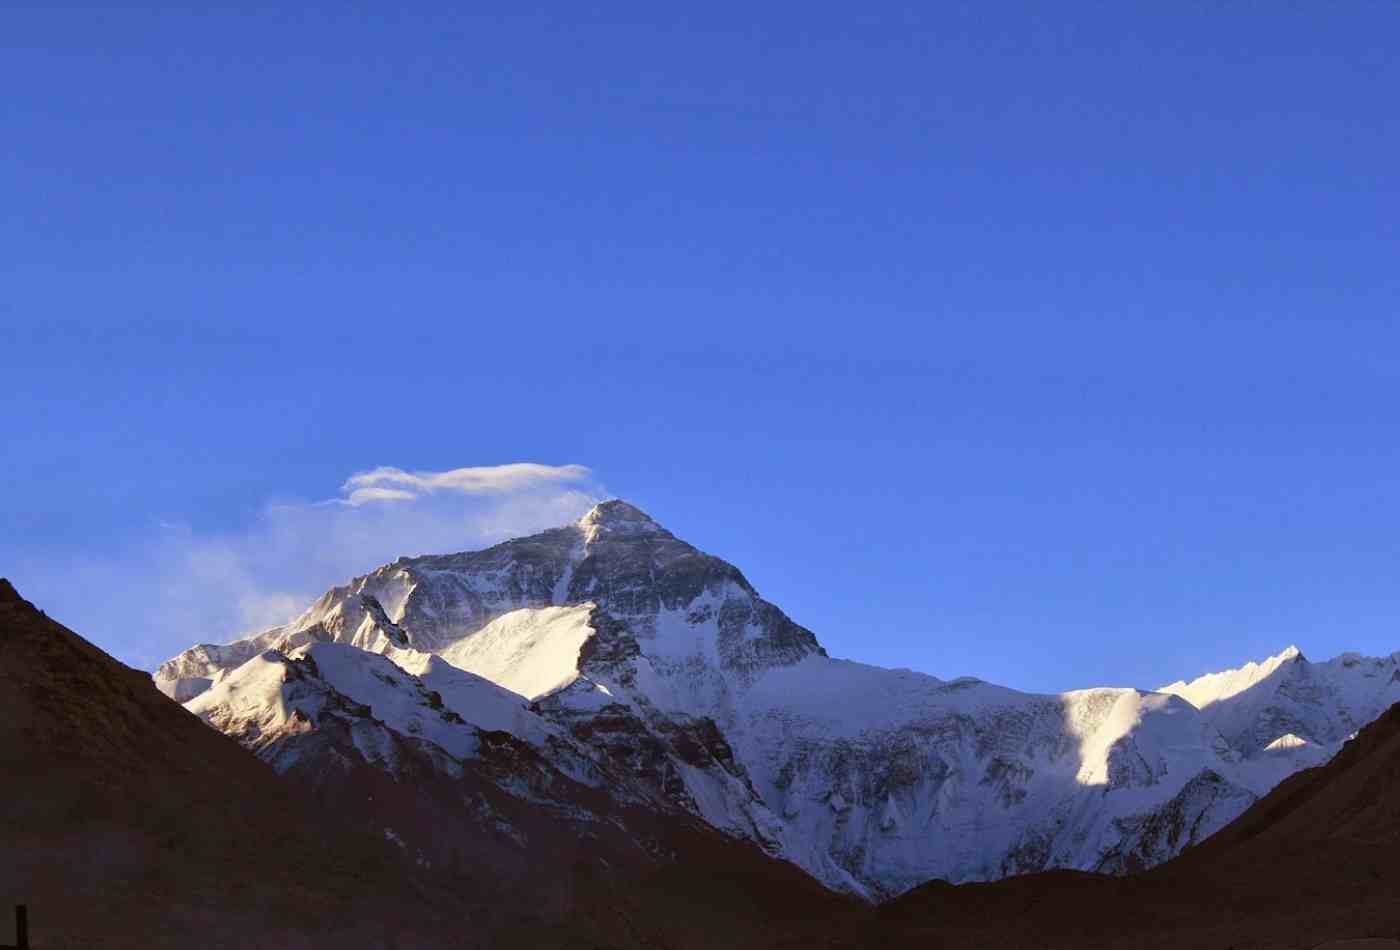 Mt. Everest, the highest peak in the world, stands tall and majestic in the clear blue sky as viewed from the Tibetan side.